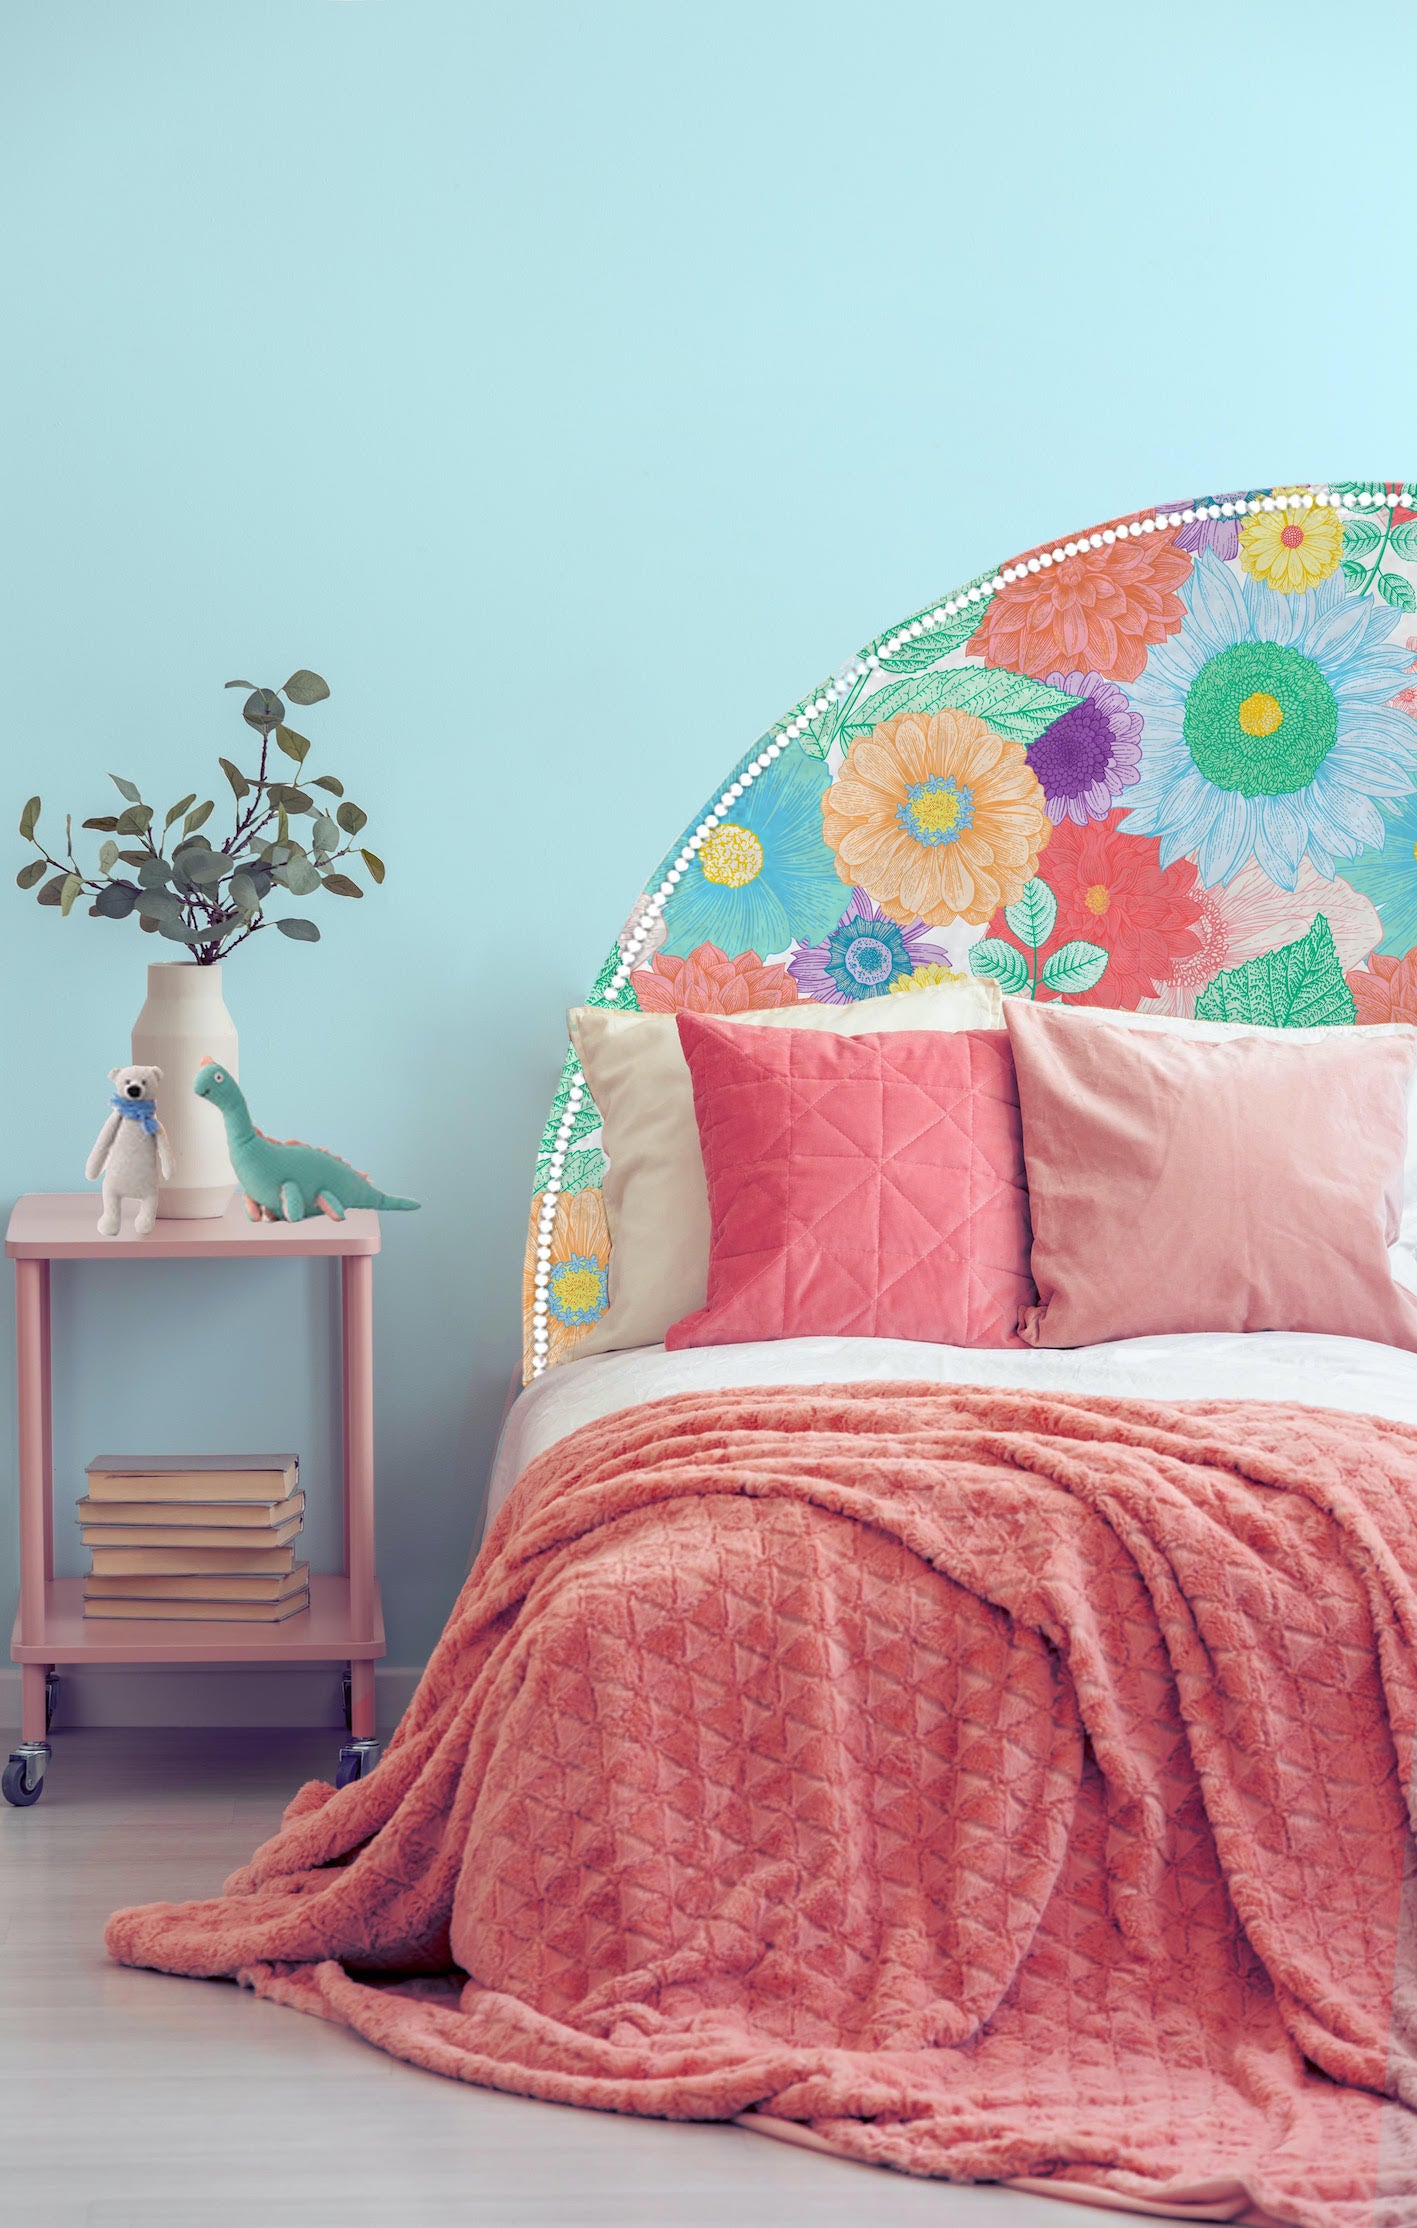 We have turned our super fun Flower Power wallpaper into a gorgeous printed velvet and used it to upholster our modern eclipse style headboard. The result is pure bedroom fun! All our headboards are made to order in Auckland, NZ, please allow 6-8 weeks for production.